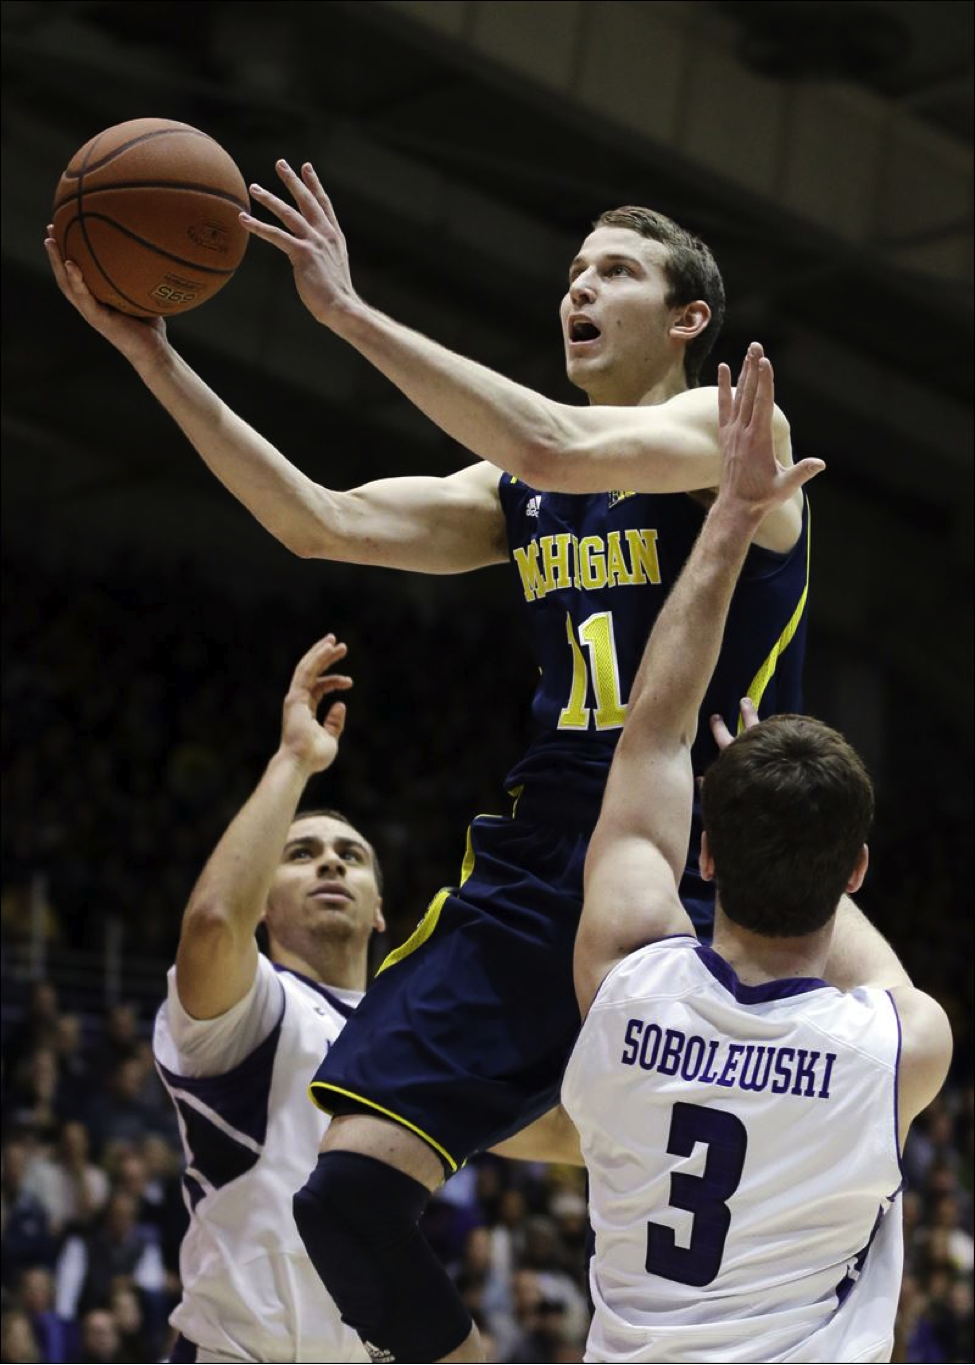 Nik Stauskas’s sustained in success in Big Ten play could make him the second consecutive Wolverine to win Big Ten player of the Year. (http://www.toledoblade.com/image/2013/01/03/800x_b1_cCM_z_cT/Michigan-Northwestern-Basketball-Nik-Stauskas.jpg)